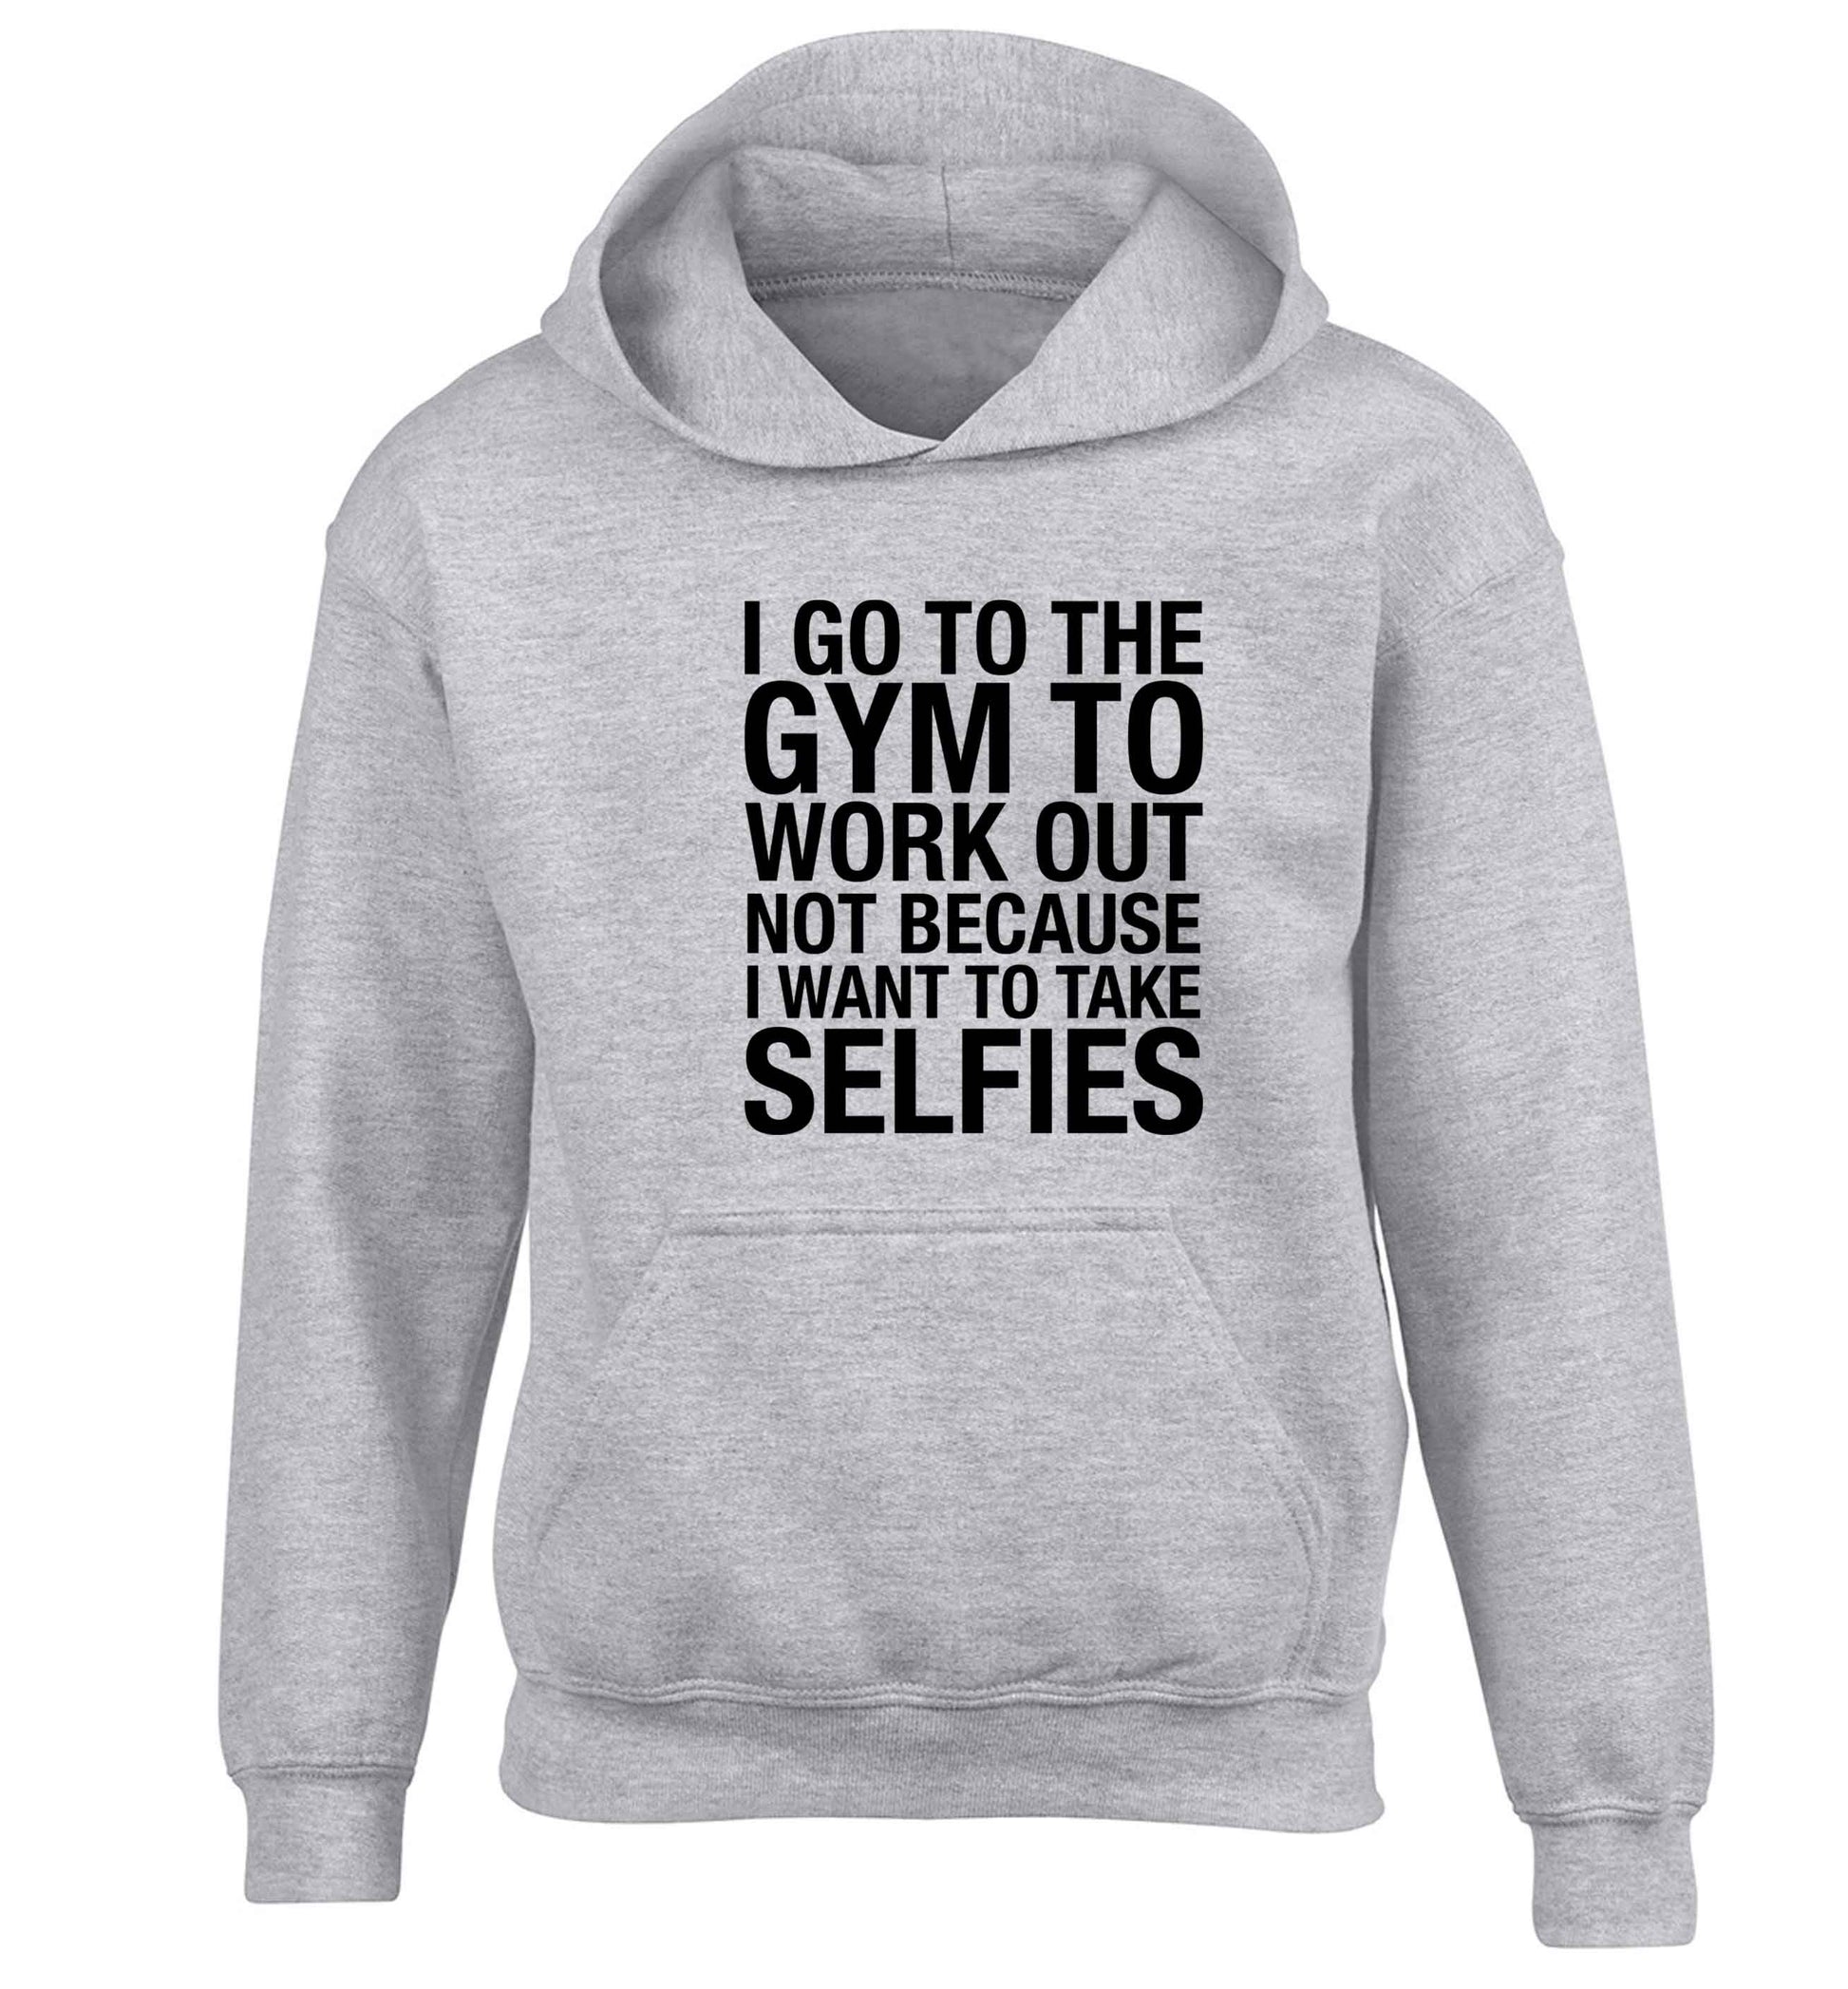 I go to the gym to workout not to take selfies children's grey hoodie 12-13 Years